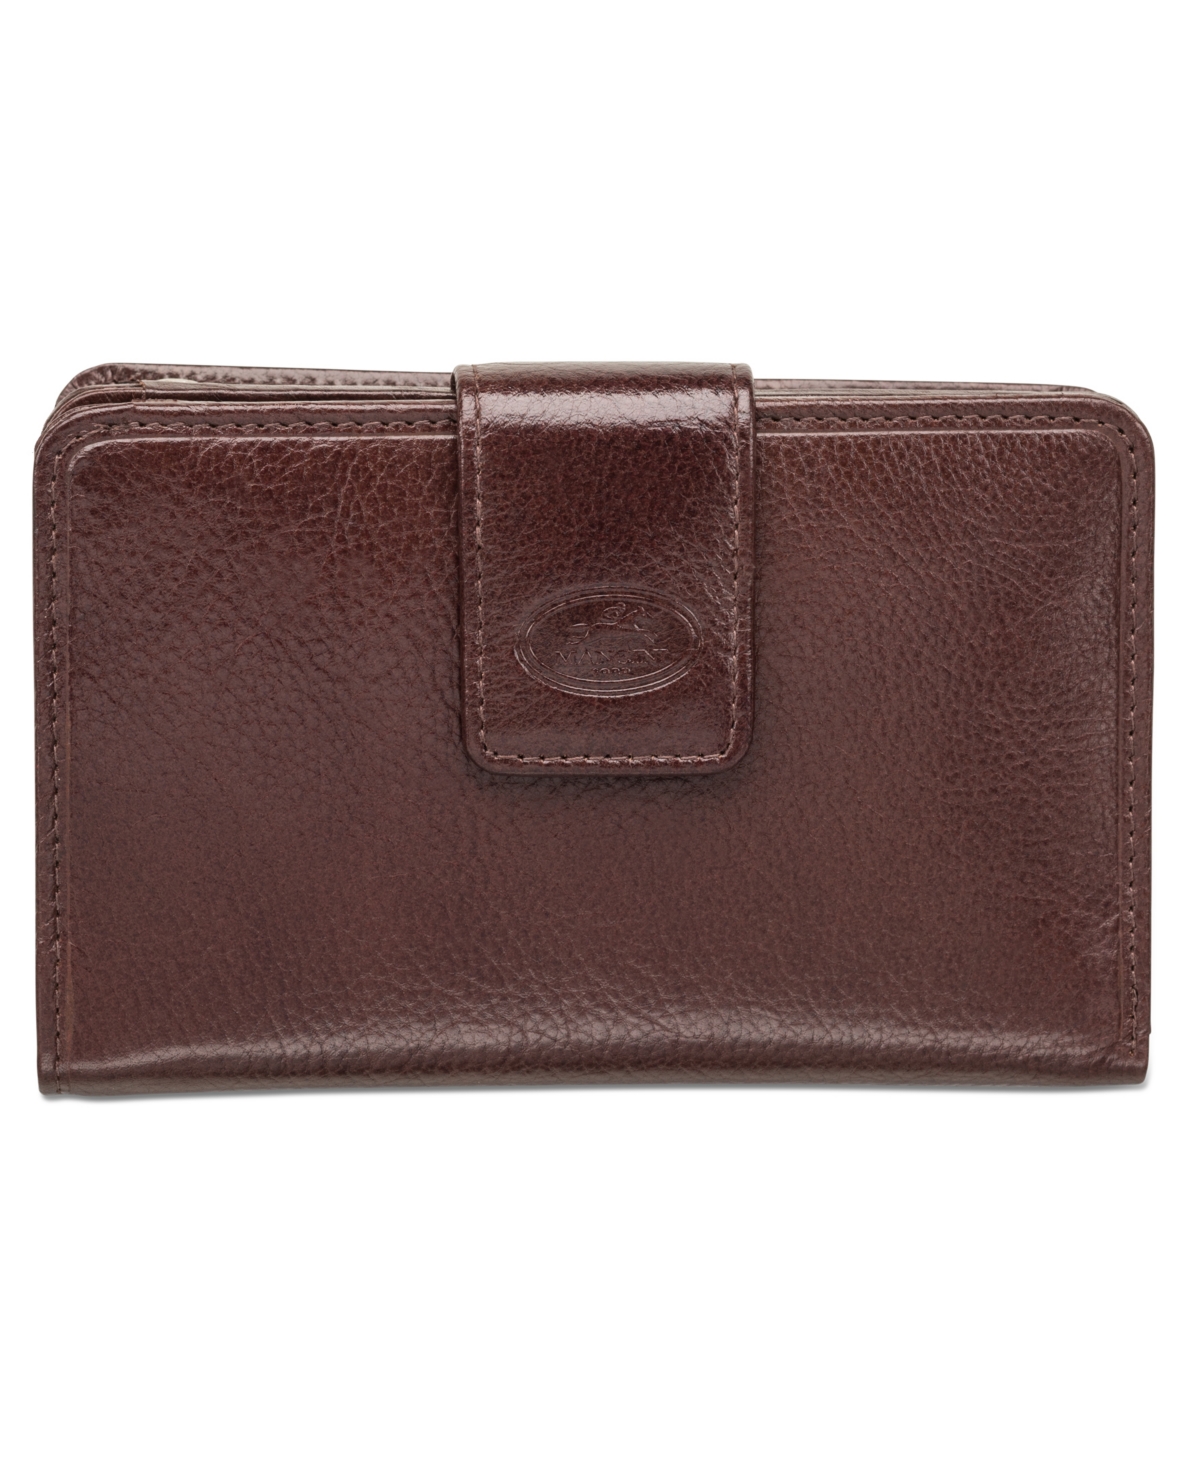 Equestrian-2 Collection Rfid Secure Medium Clutch Wallet - Brown